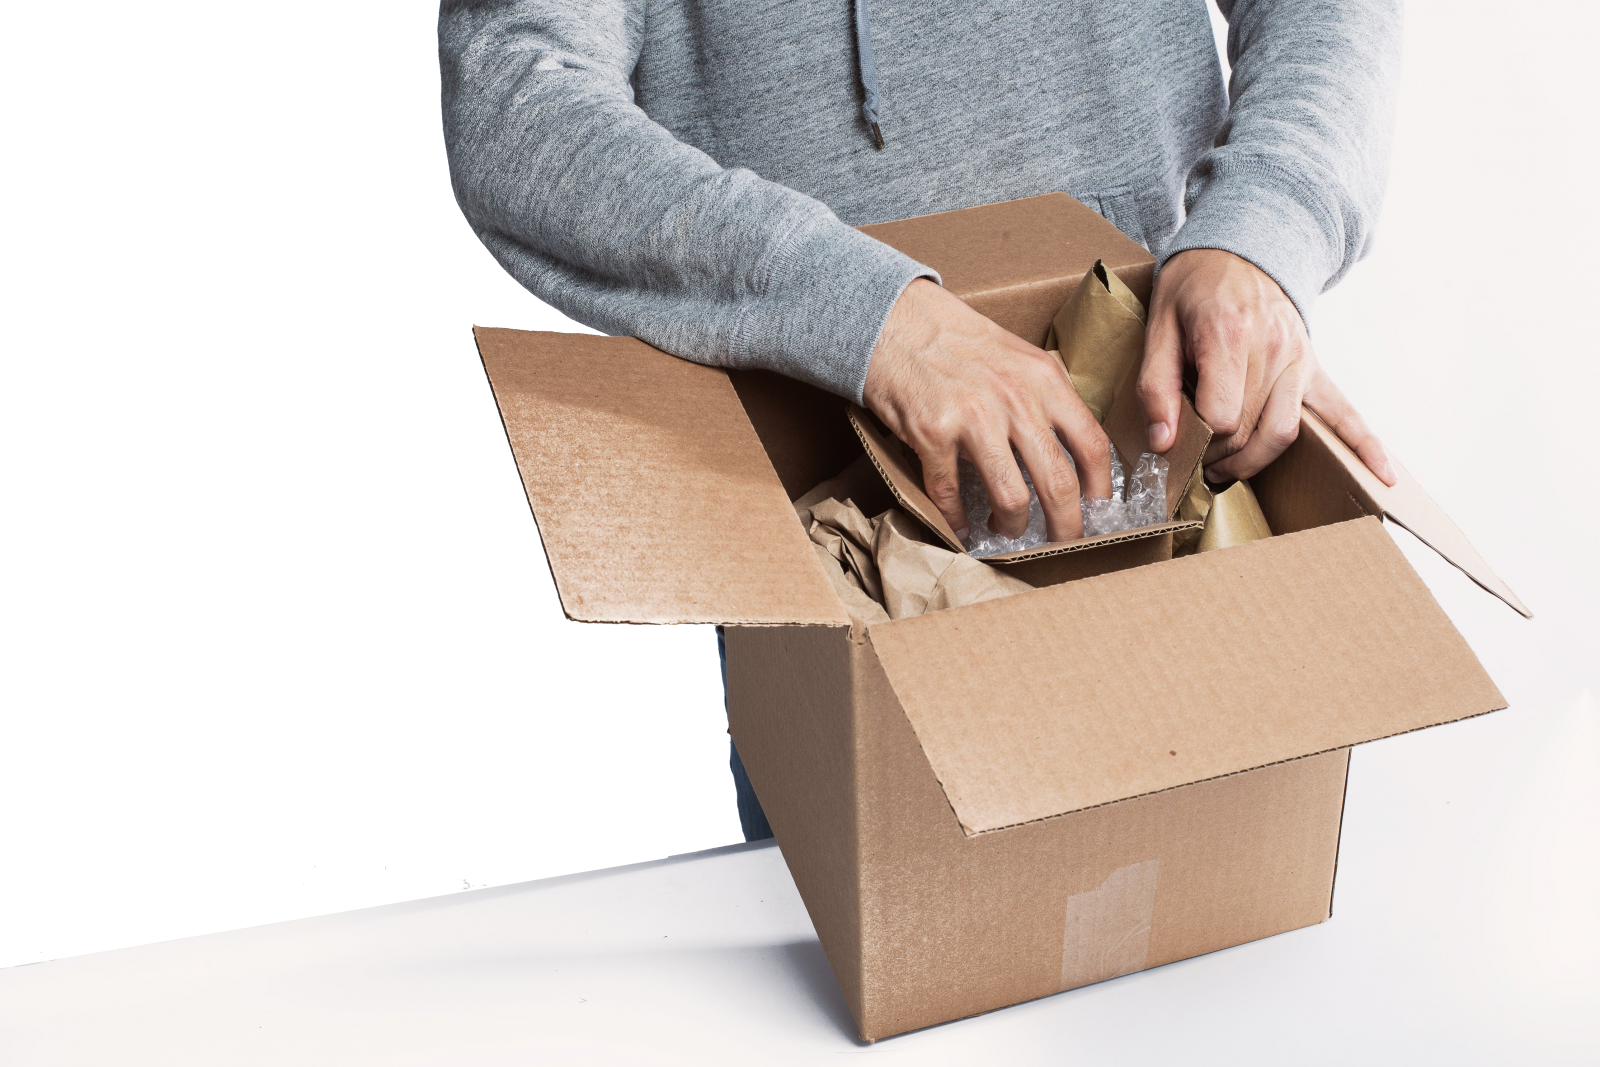 A person packs a box with small items